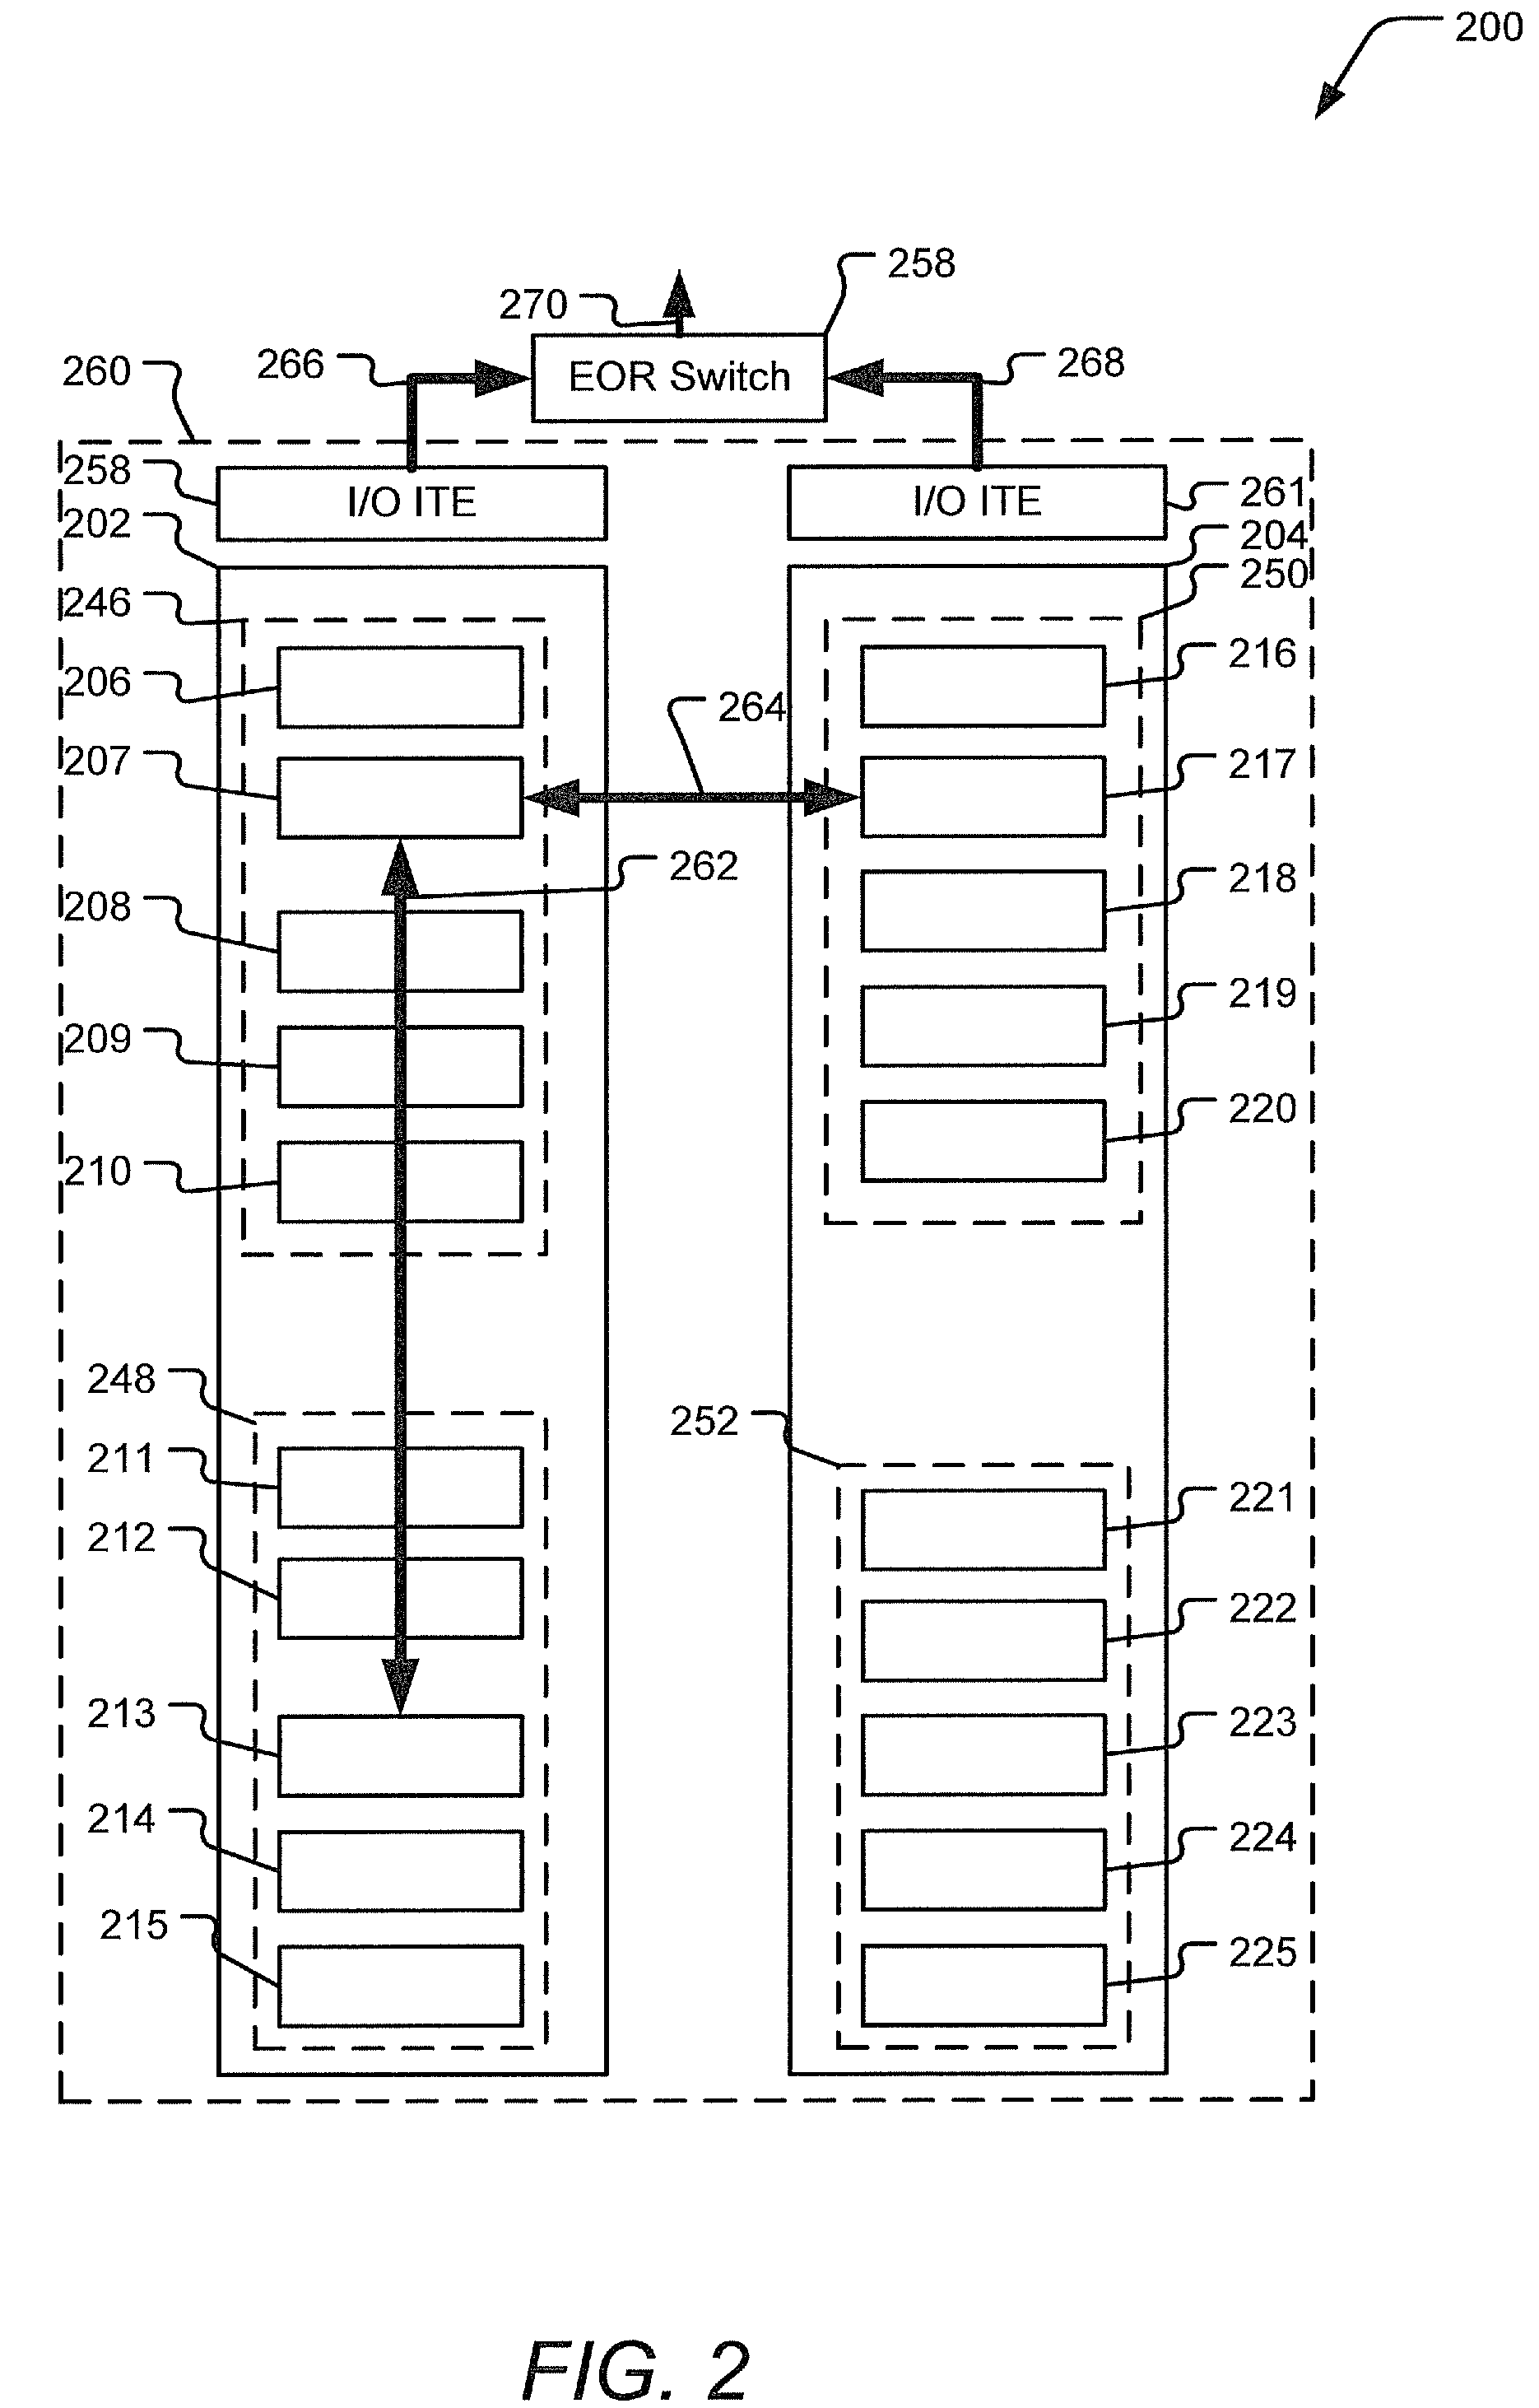 Priority based flow control within a virtual distributed bridge environment